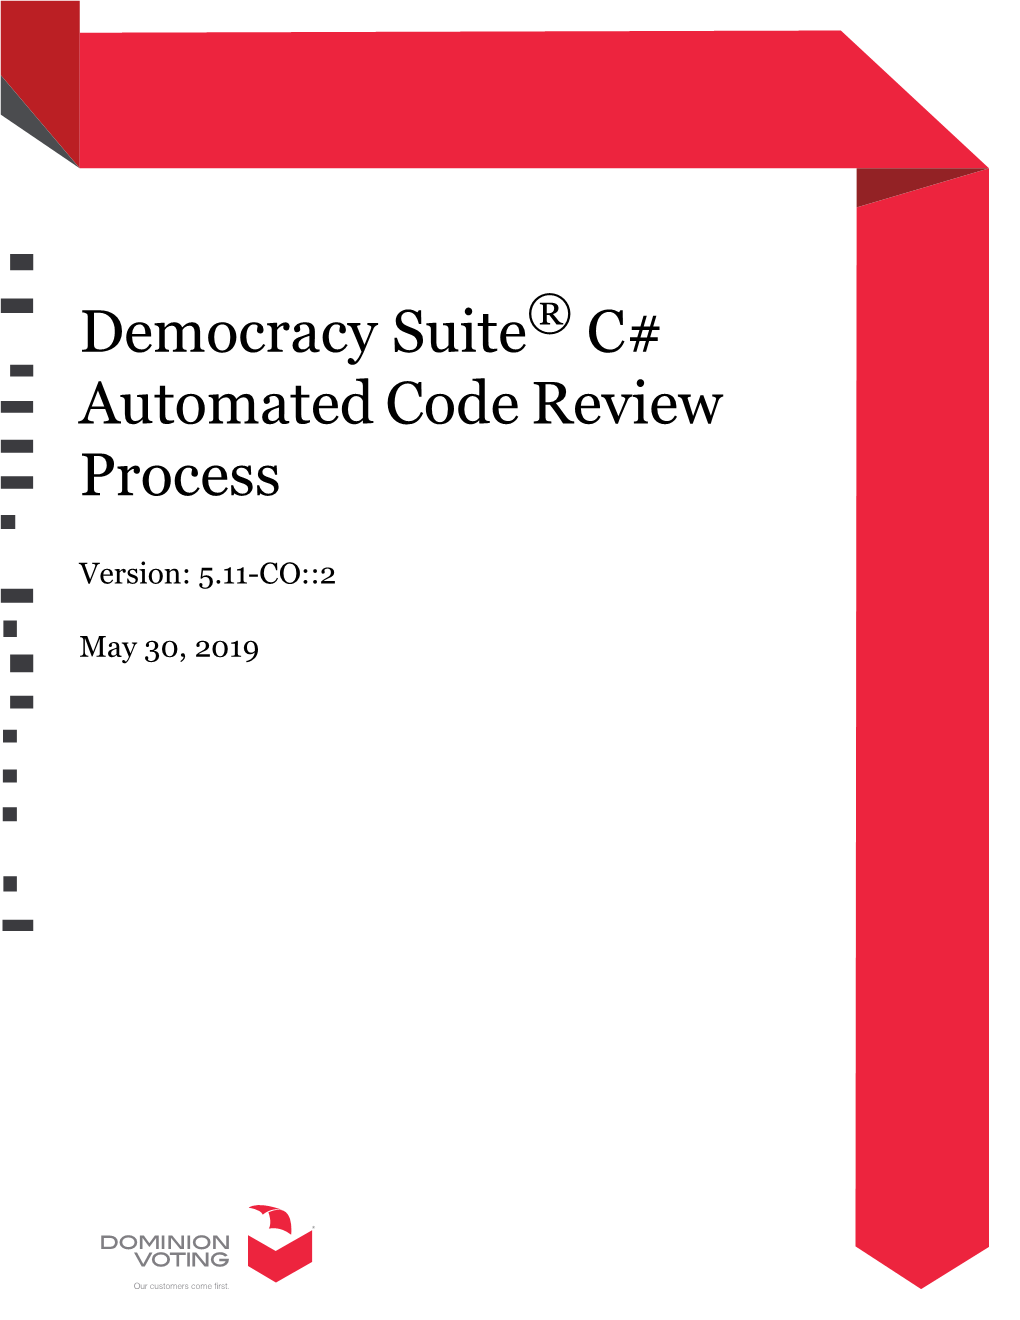 Democracy Suite C# Automated Code Review Process